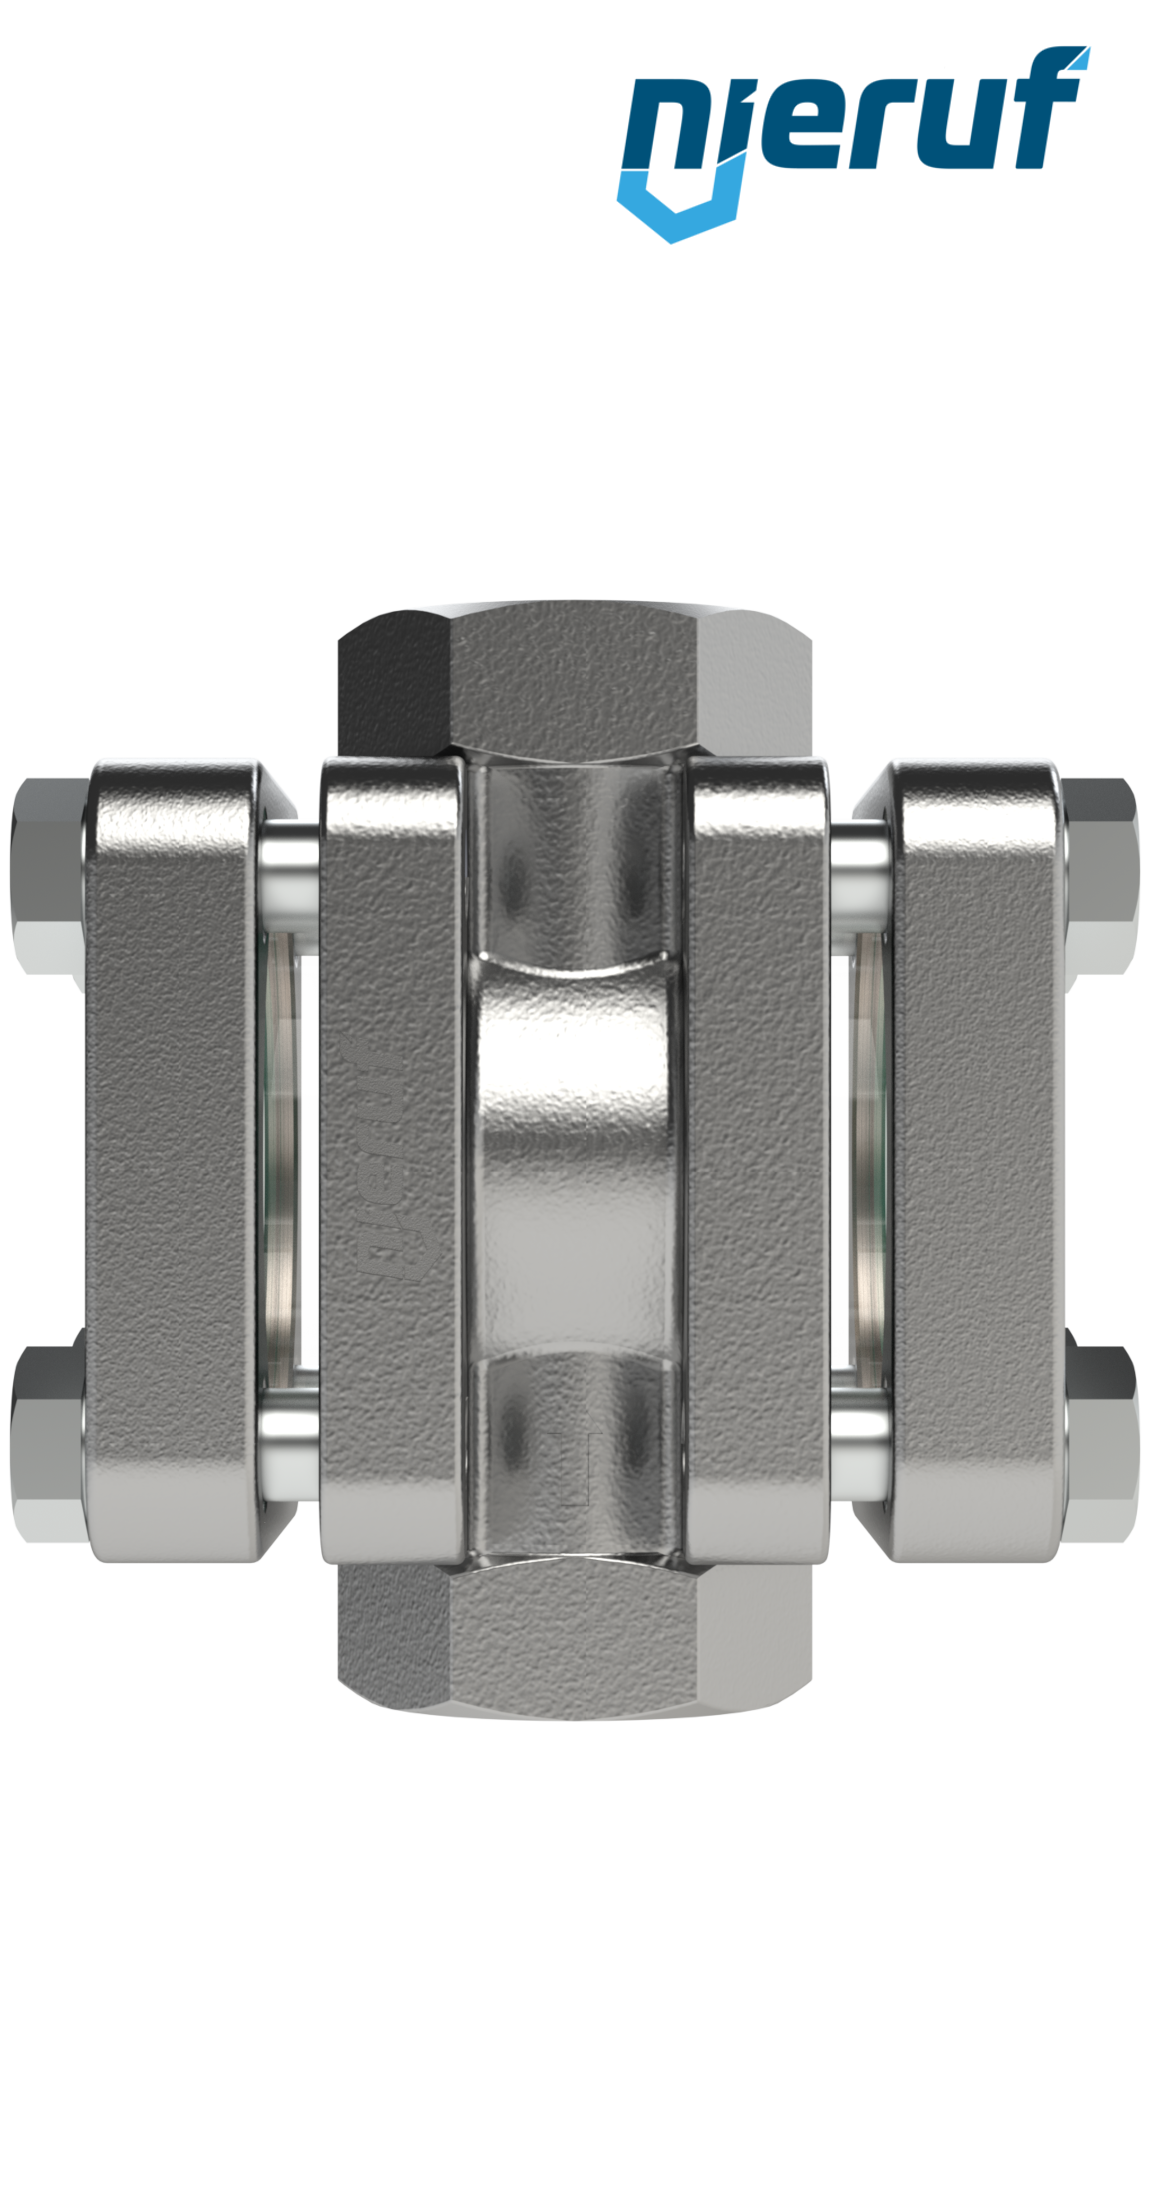 flow-through sight flow indicator DN15 - 1/2" Inch stainless steel soda lime glass design with disc